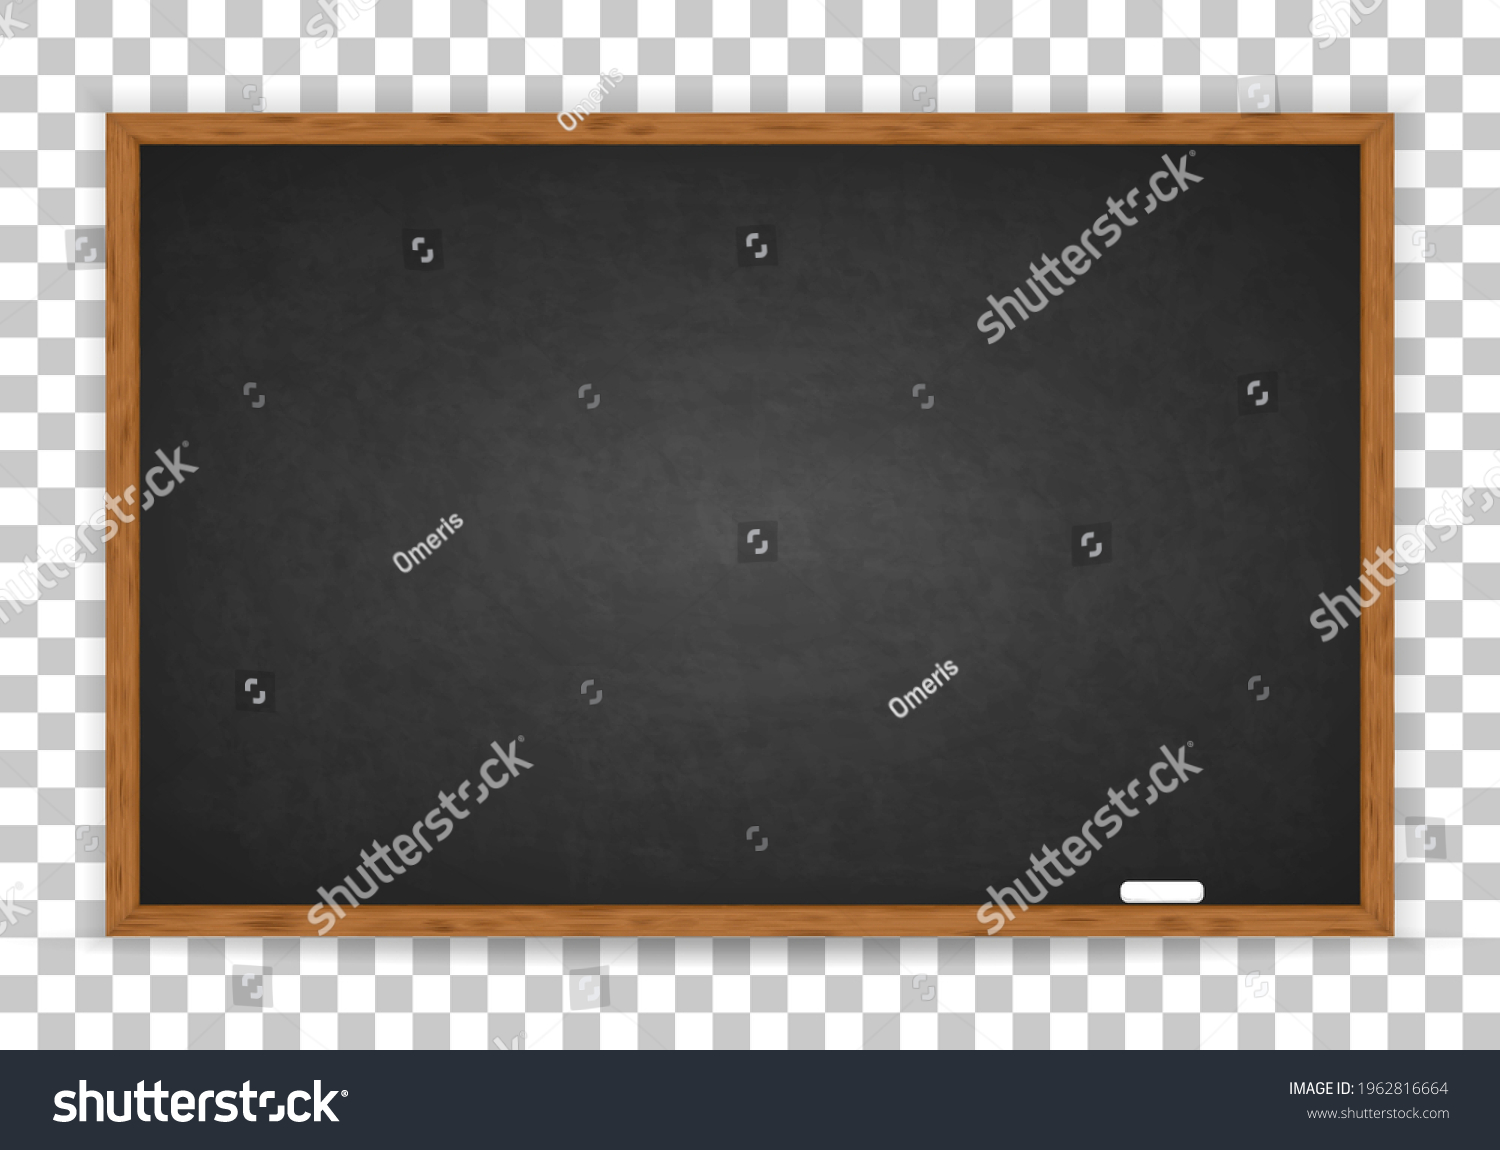 Rubbed out dirty chalkboard. Realistic blackboard in wood frame isolated on transparent background. Empty chalkboard for restaurant menu or school class. Sign black board for design prints. Vector #1962816664